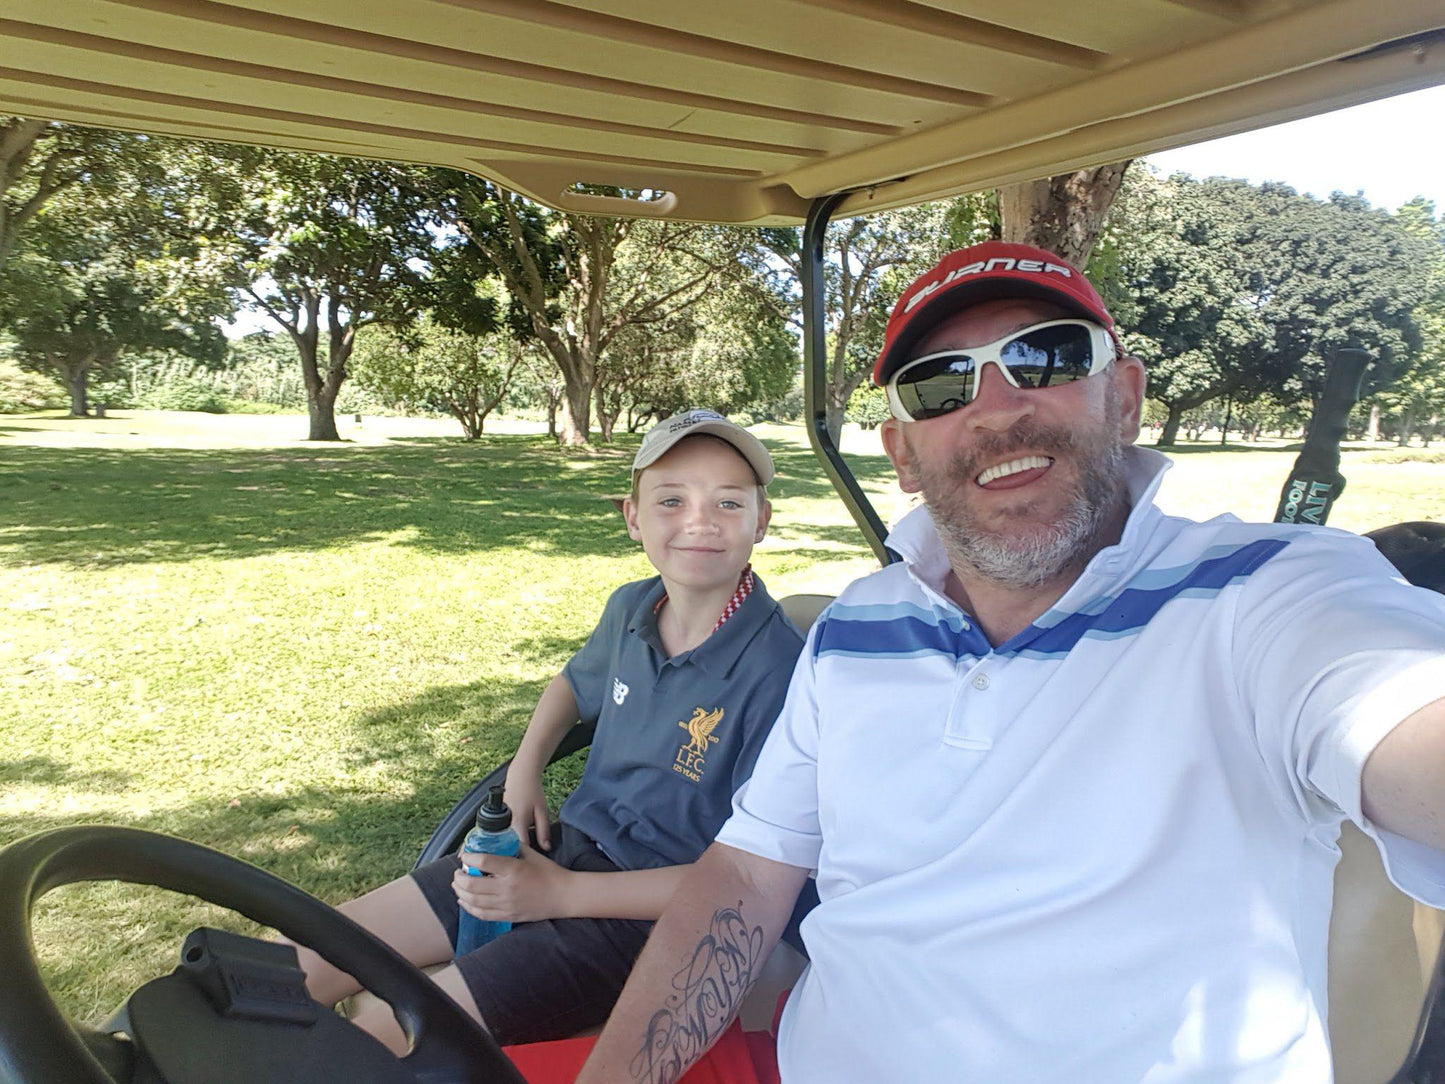 Complementary Colors, Ball Game, Sport, Golfing, Person, Face, Two Faces, Frontal Face, Male, Eyes Open, Smile, Child, Adult, Beard, Sunglasses, Durban Golf Club, 256 New Germany Rd, Recreation, Durban, 4090